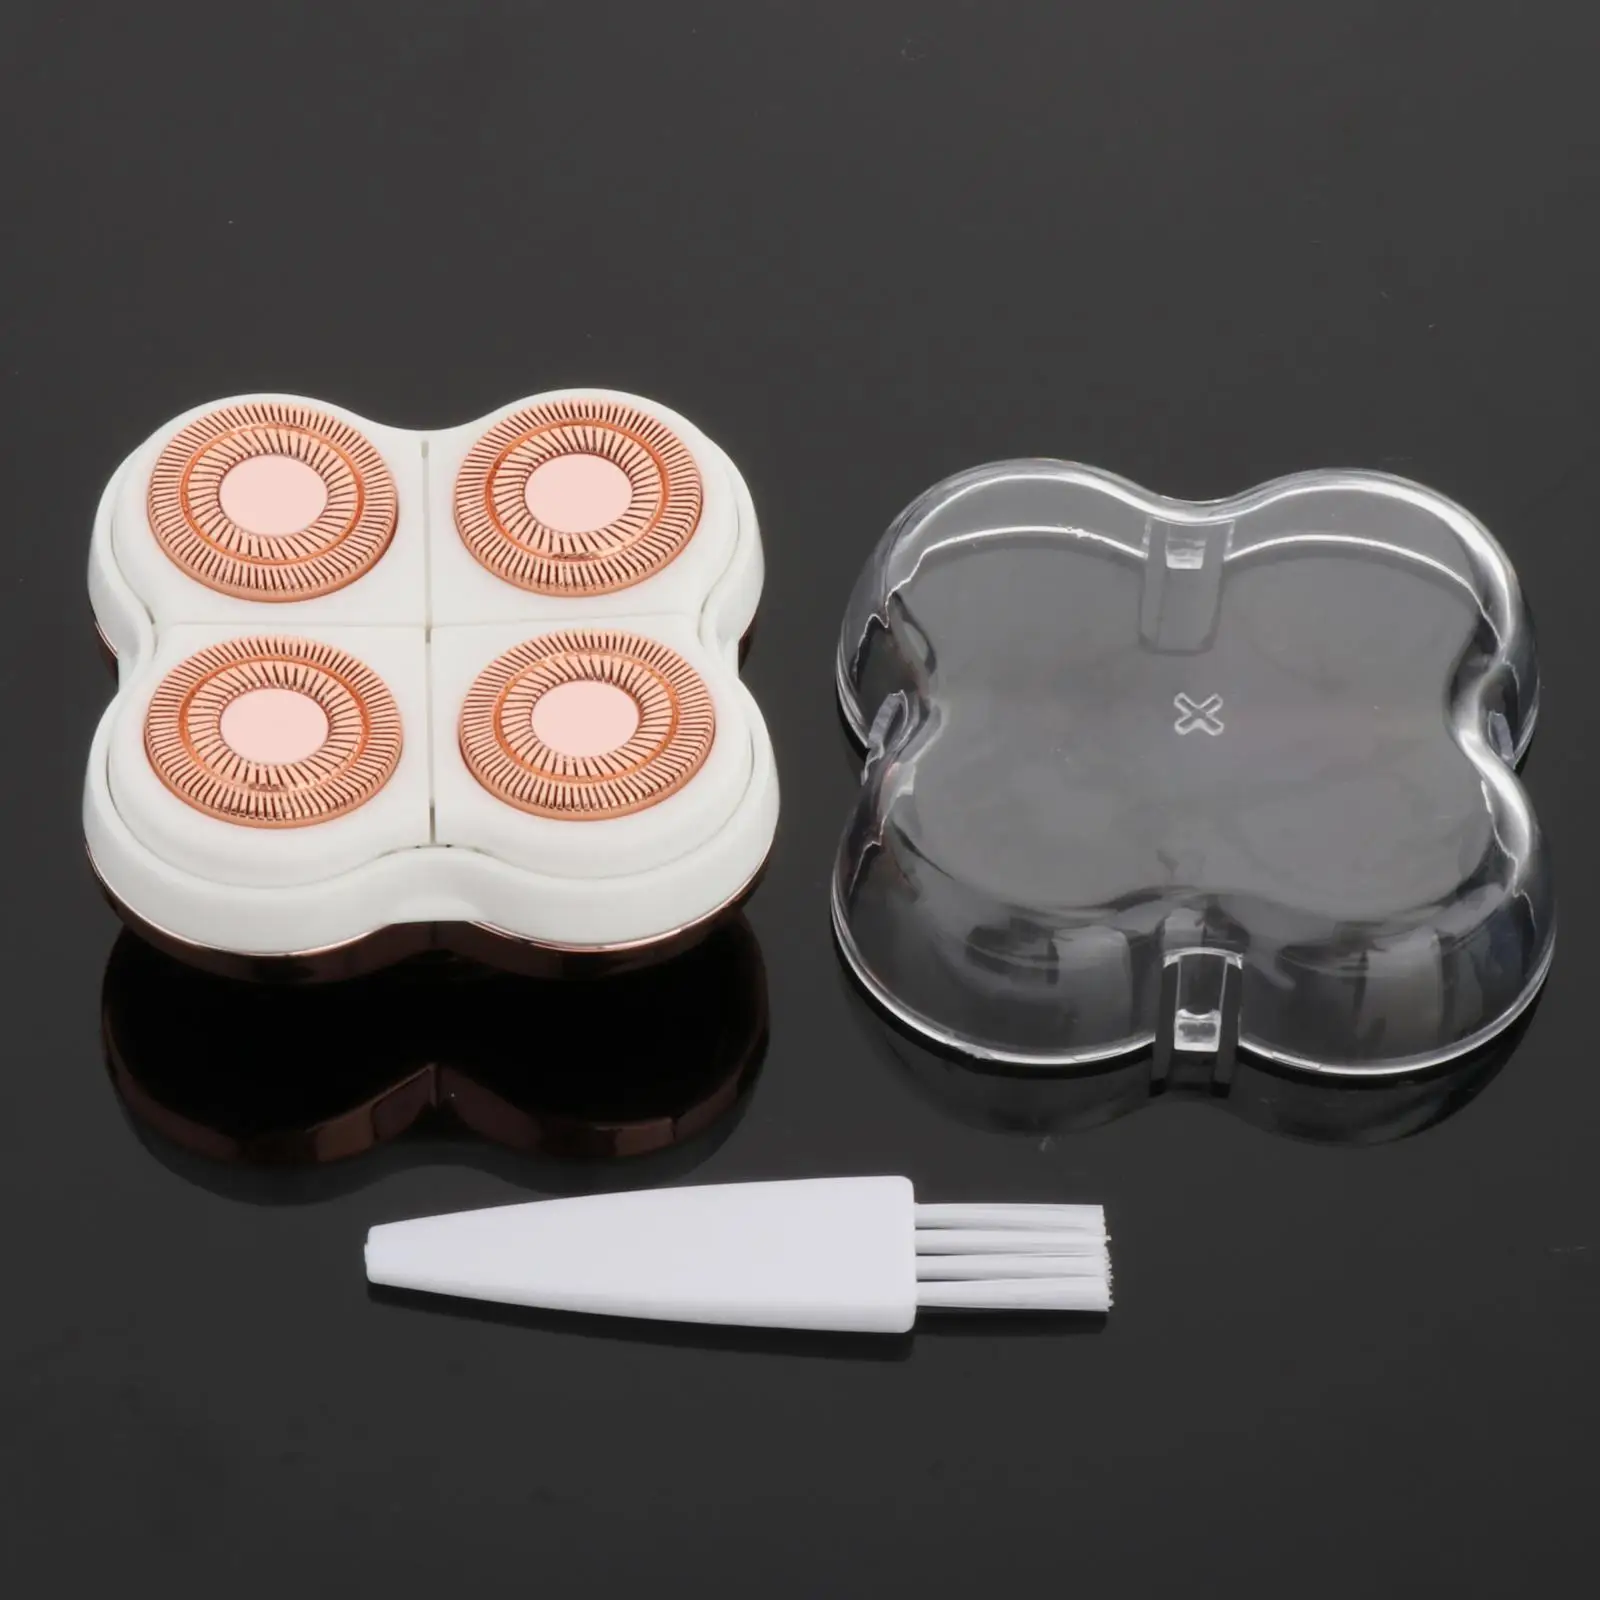 Body Legs Hair Remover Head Replaces for Women, Rose Gold for Face Armpit